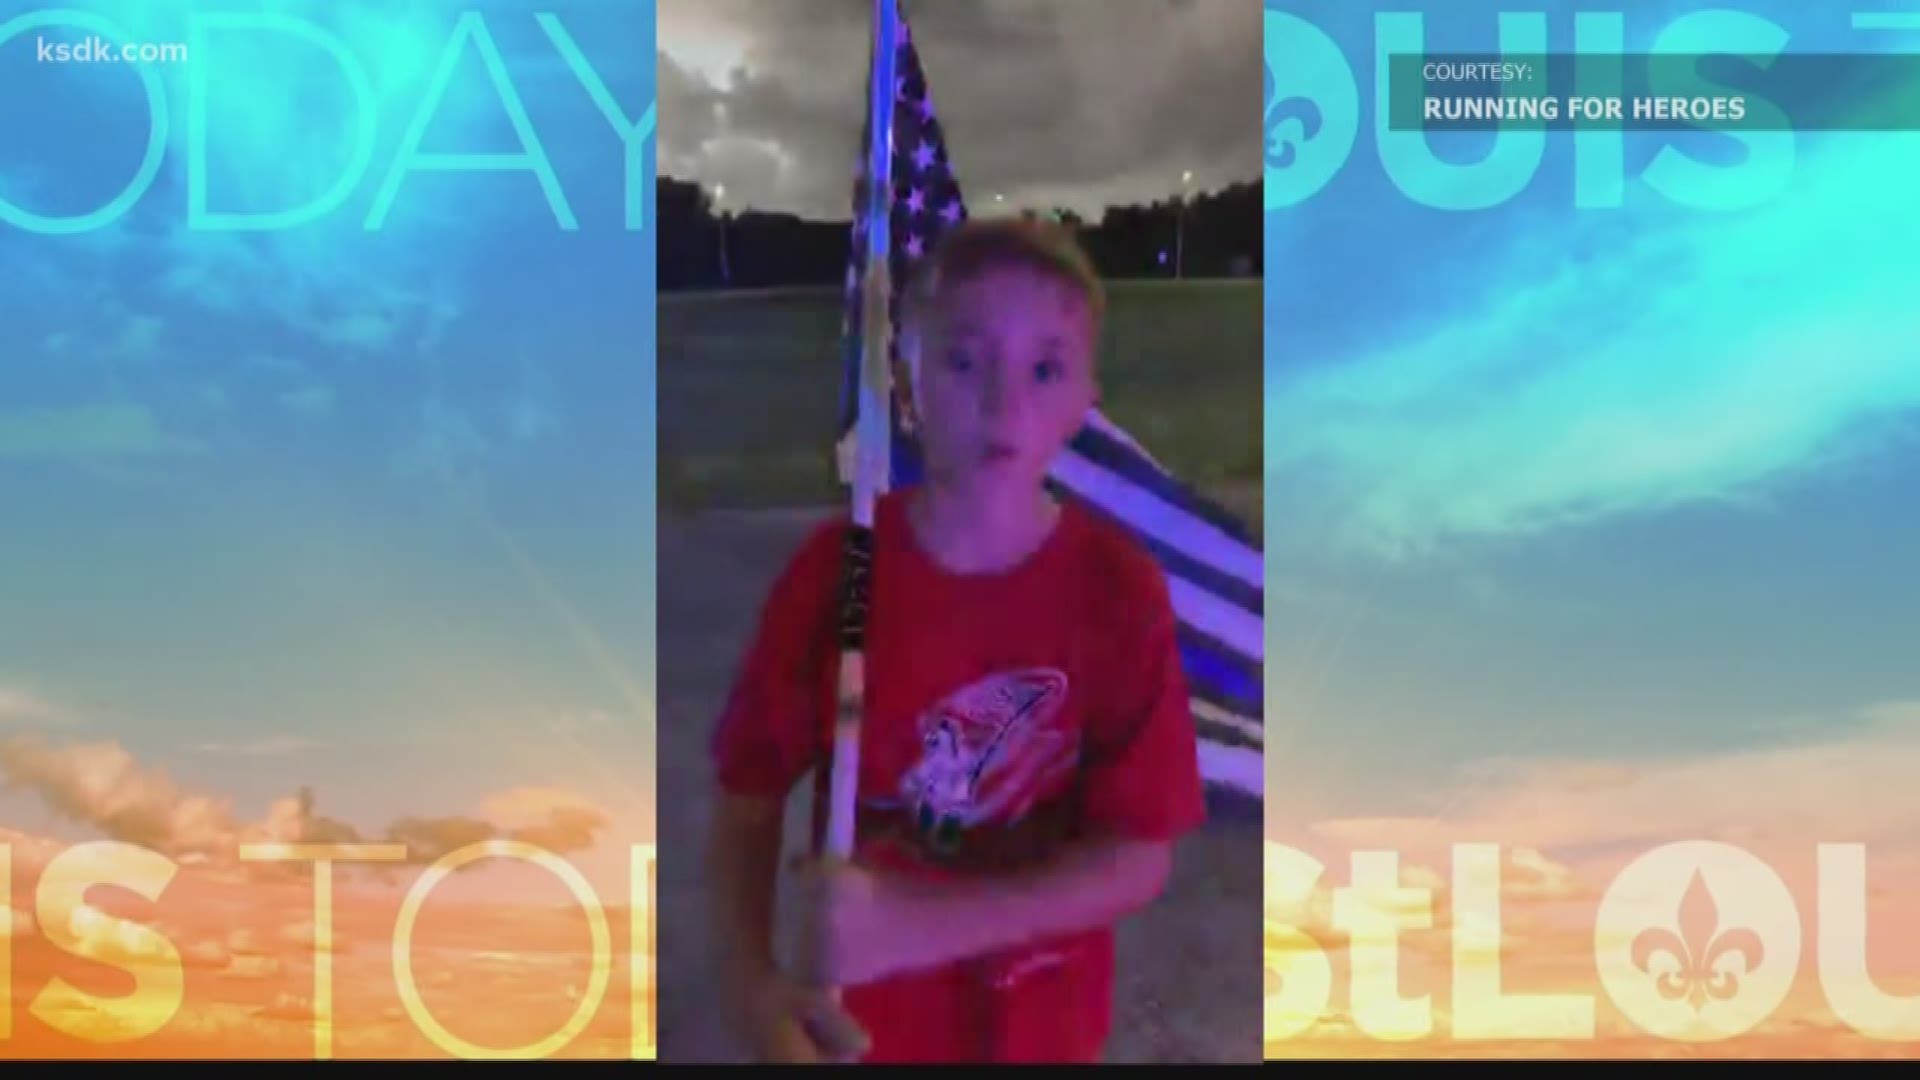 Florida boy runs one mile for every fallen officer